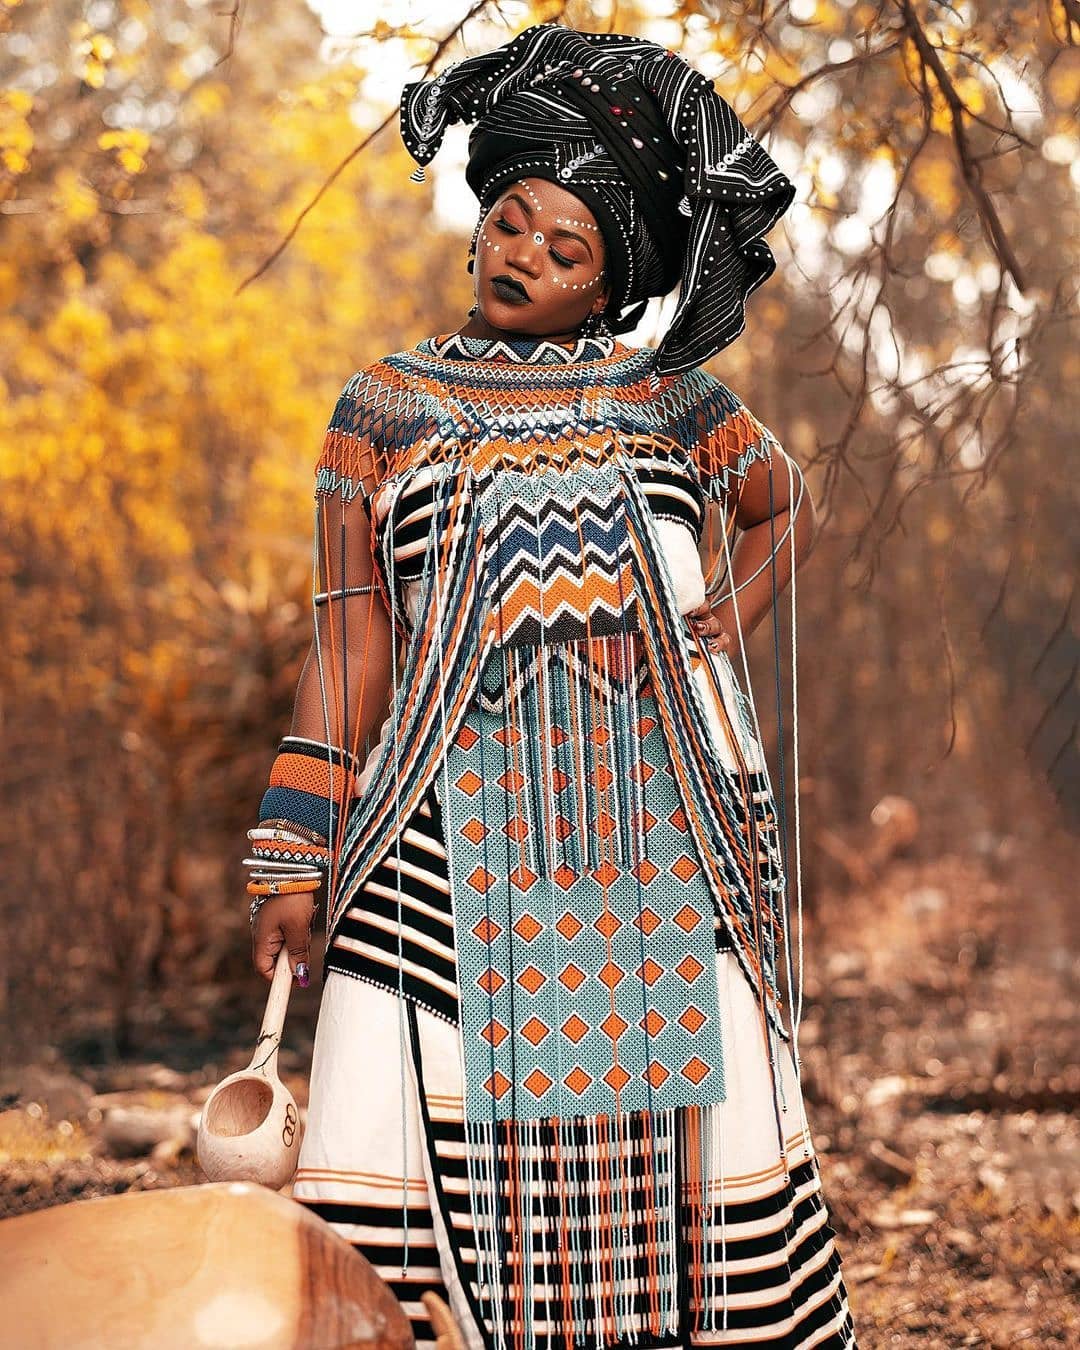 Wearing Xhosa Heritage: Dresses that Sing with Cultural Pride 17